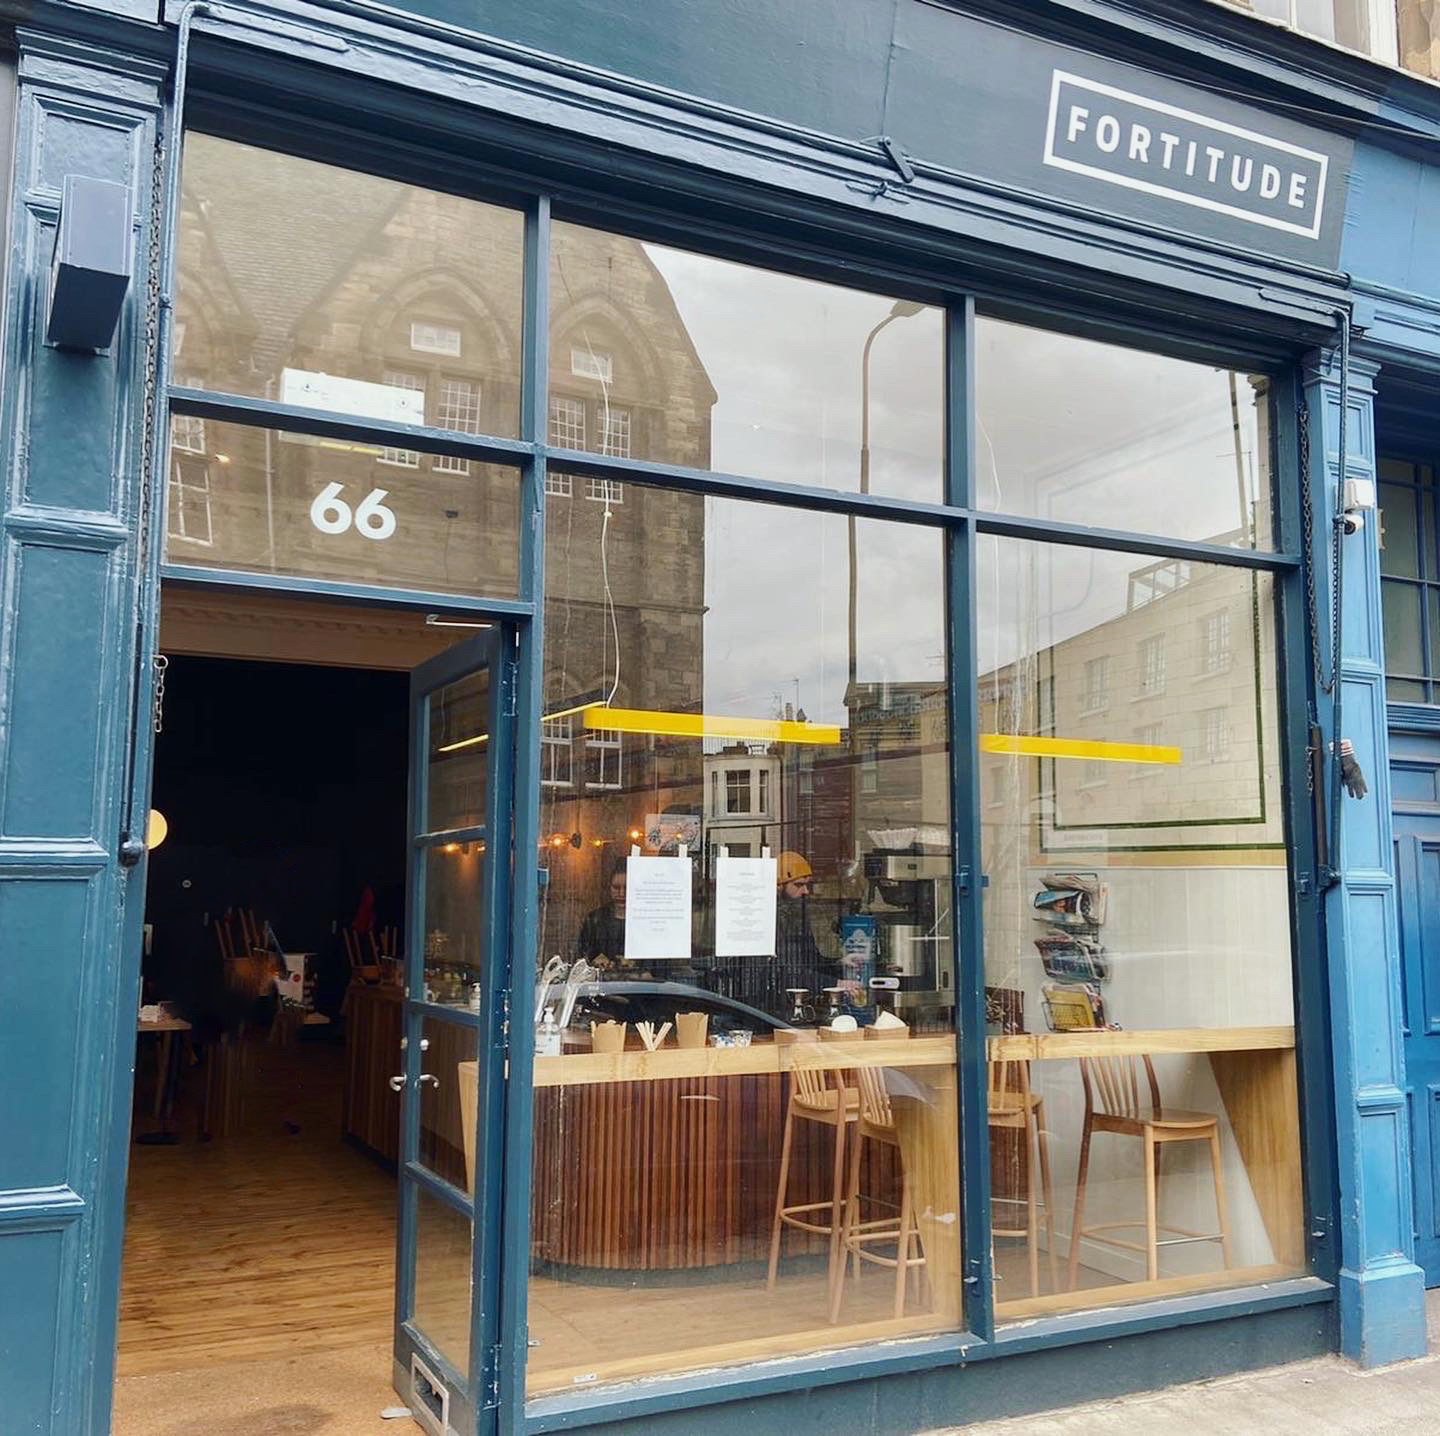 The Best Coffee Shops for First Dates in Edinburgh